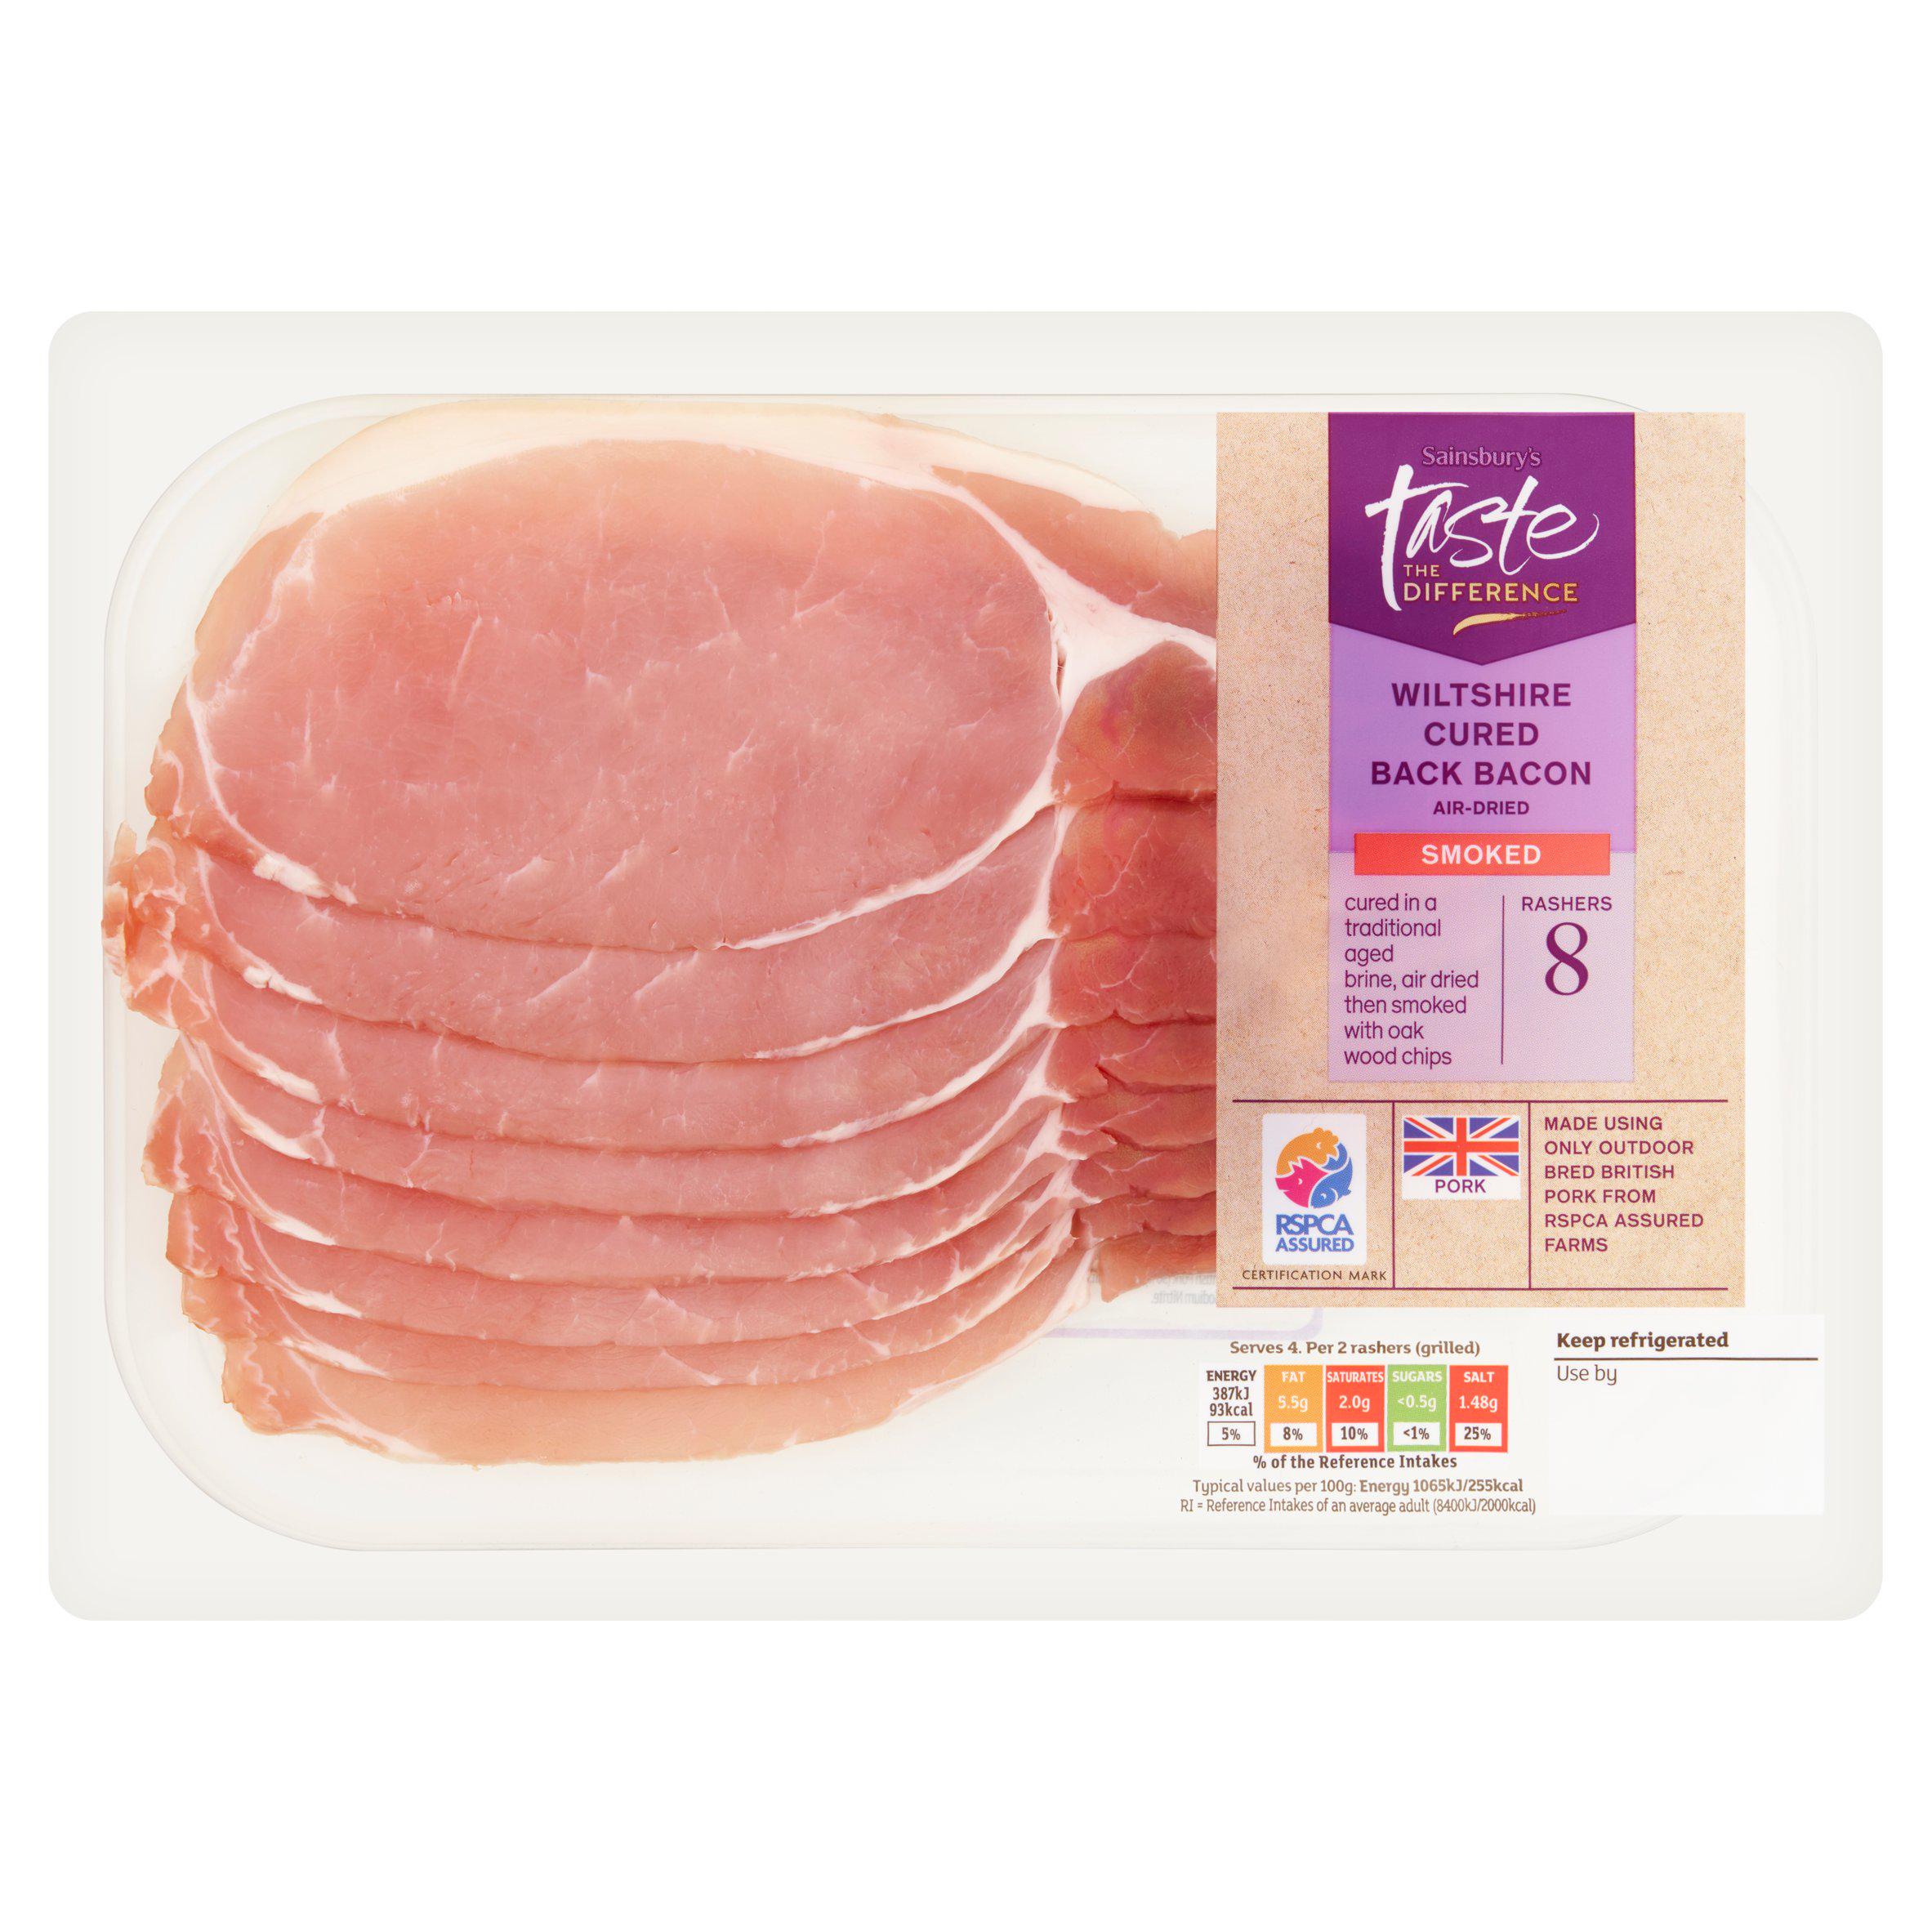 Sainsbury's Smoked Air Dried Wiltshire Cured Back Bacon Rashers, Taste the Difference x8 240g